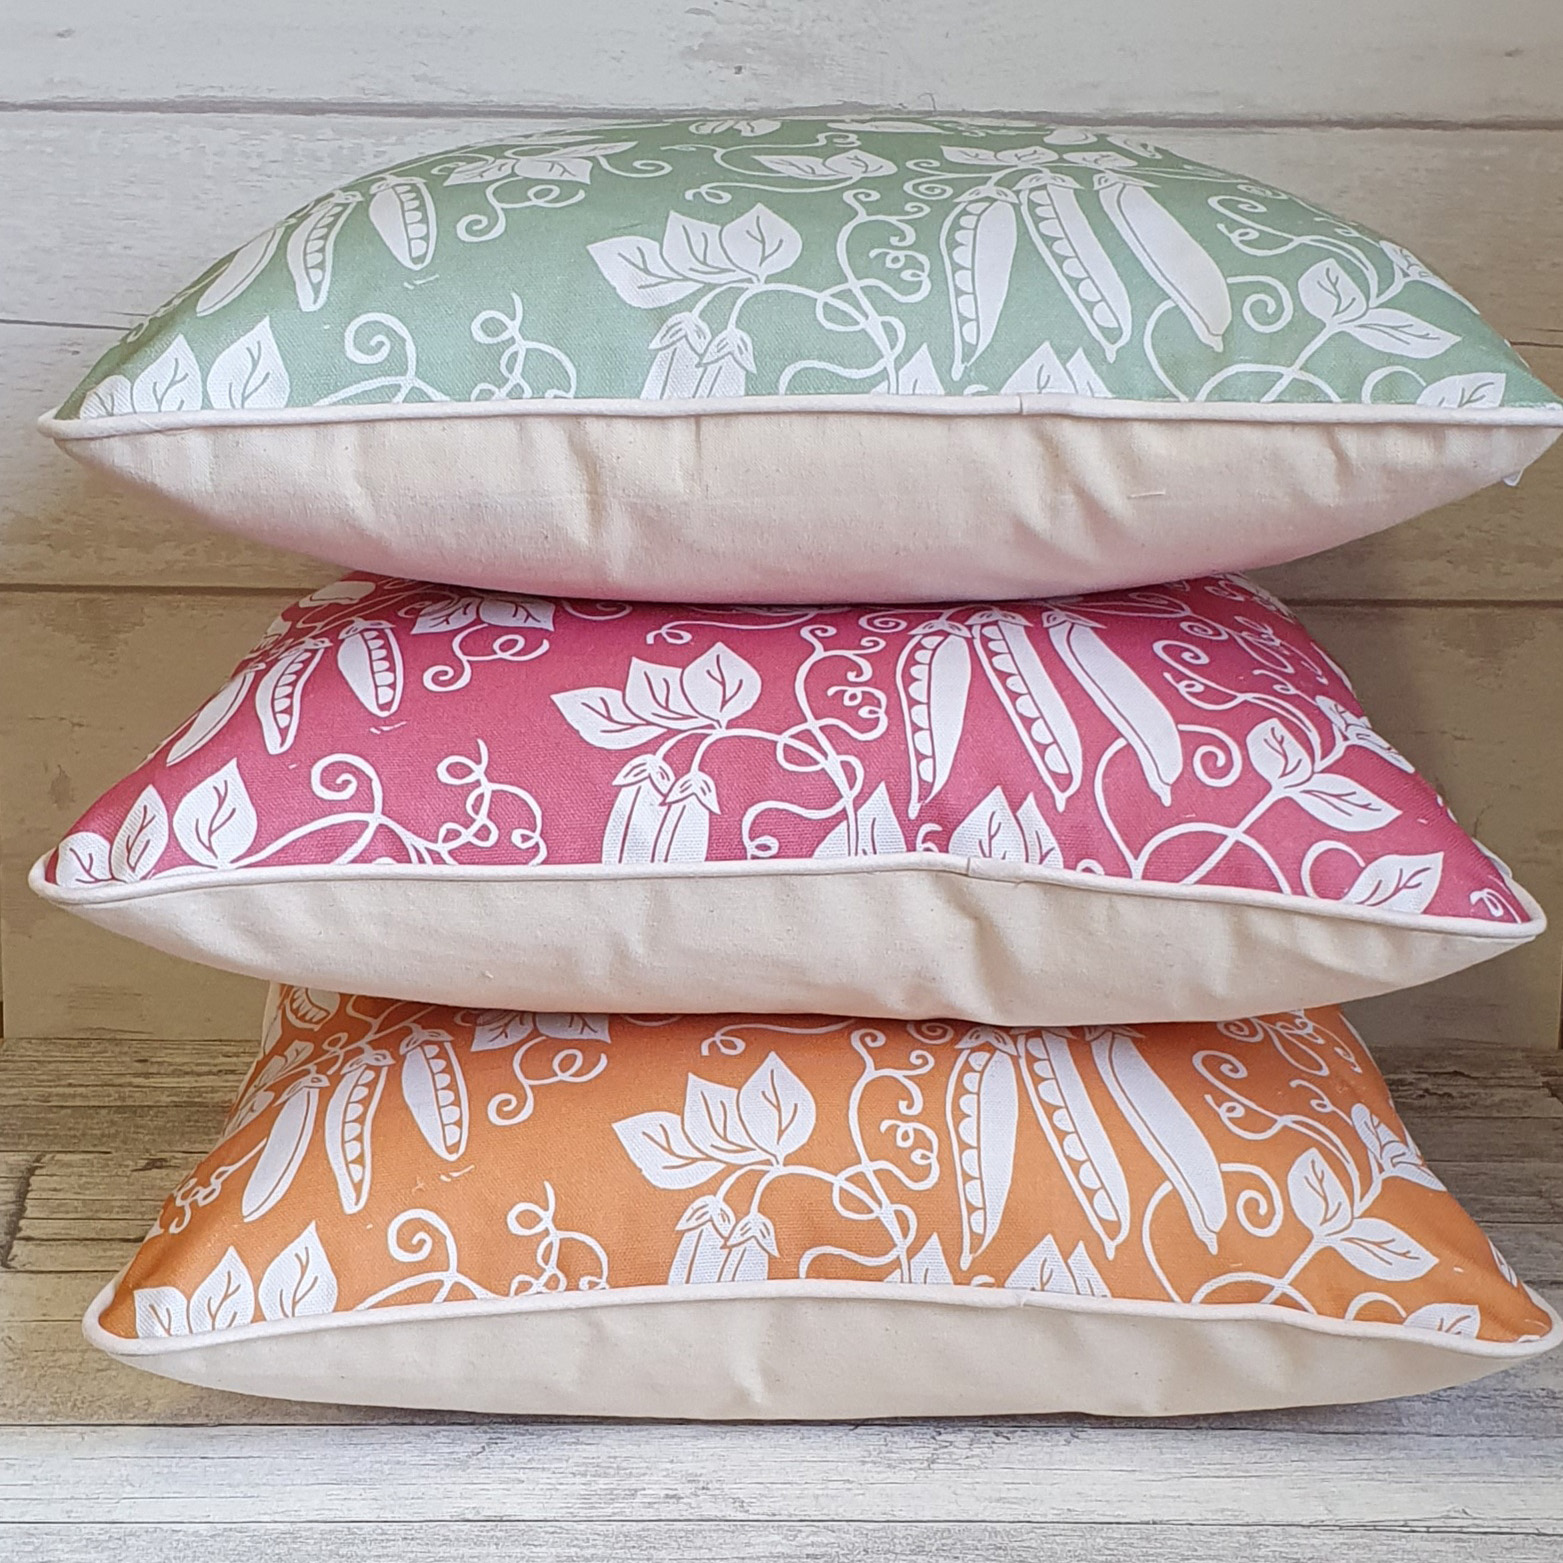 3 cushions made by Lizzie Mabley